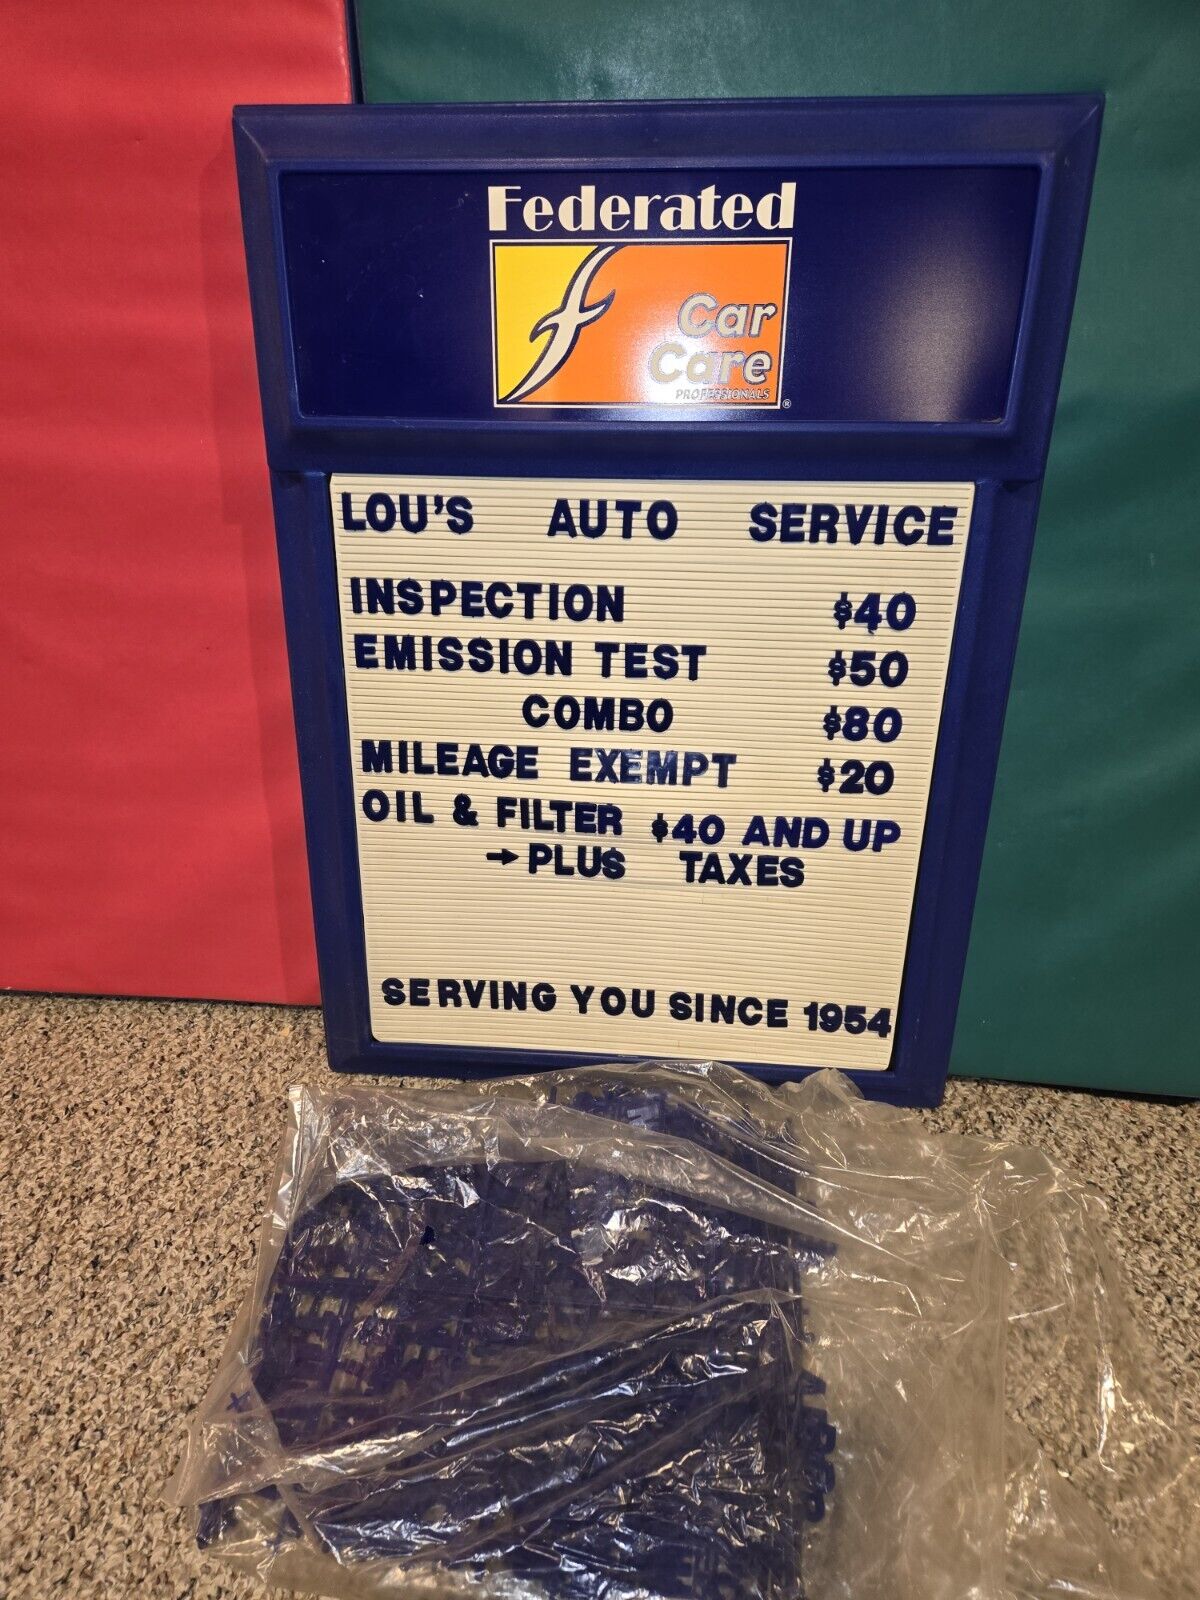 Vintage 2001 Federated Car Care Letterboard Garage Auto Repair Shop Sign